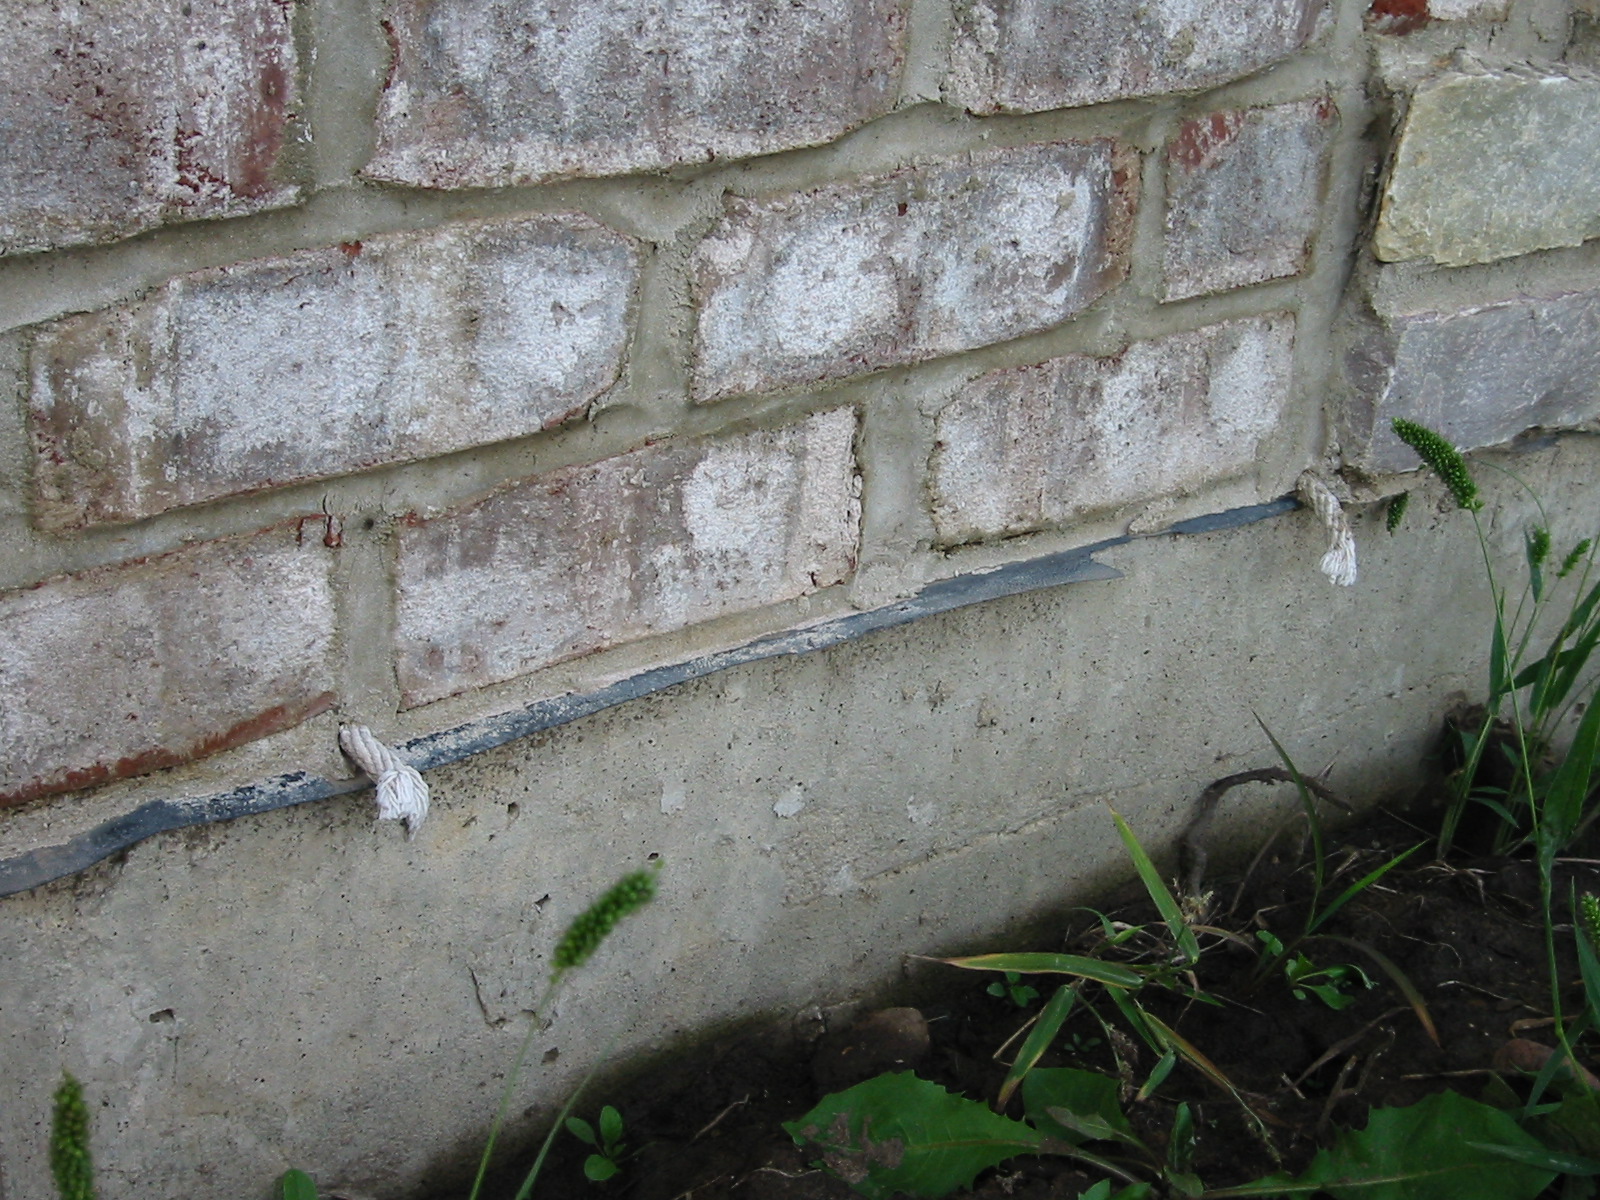 Weep holes: Rope inserted in the head joist between bricks will allow water to weep out of the base of the wall assembly.